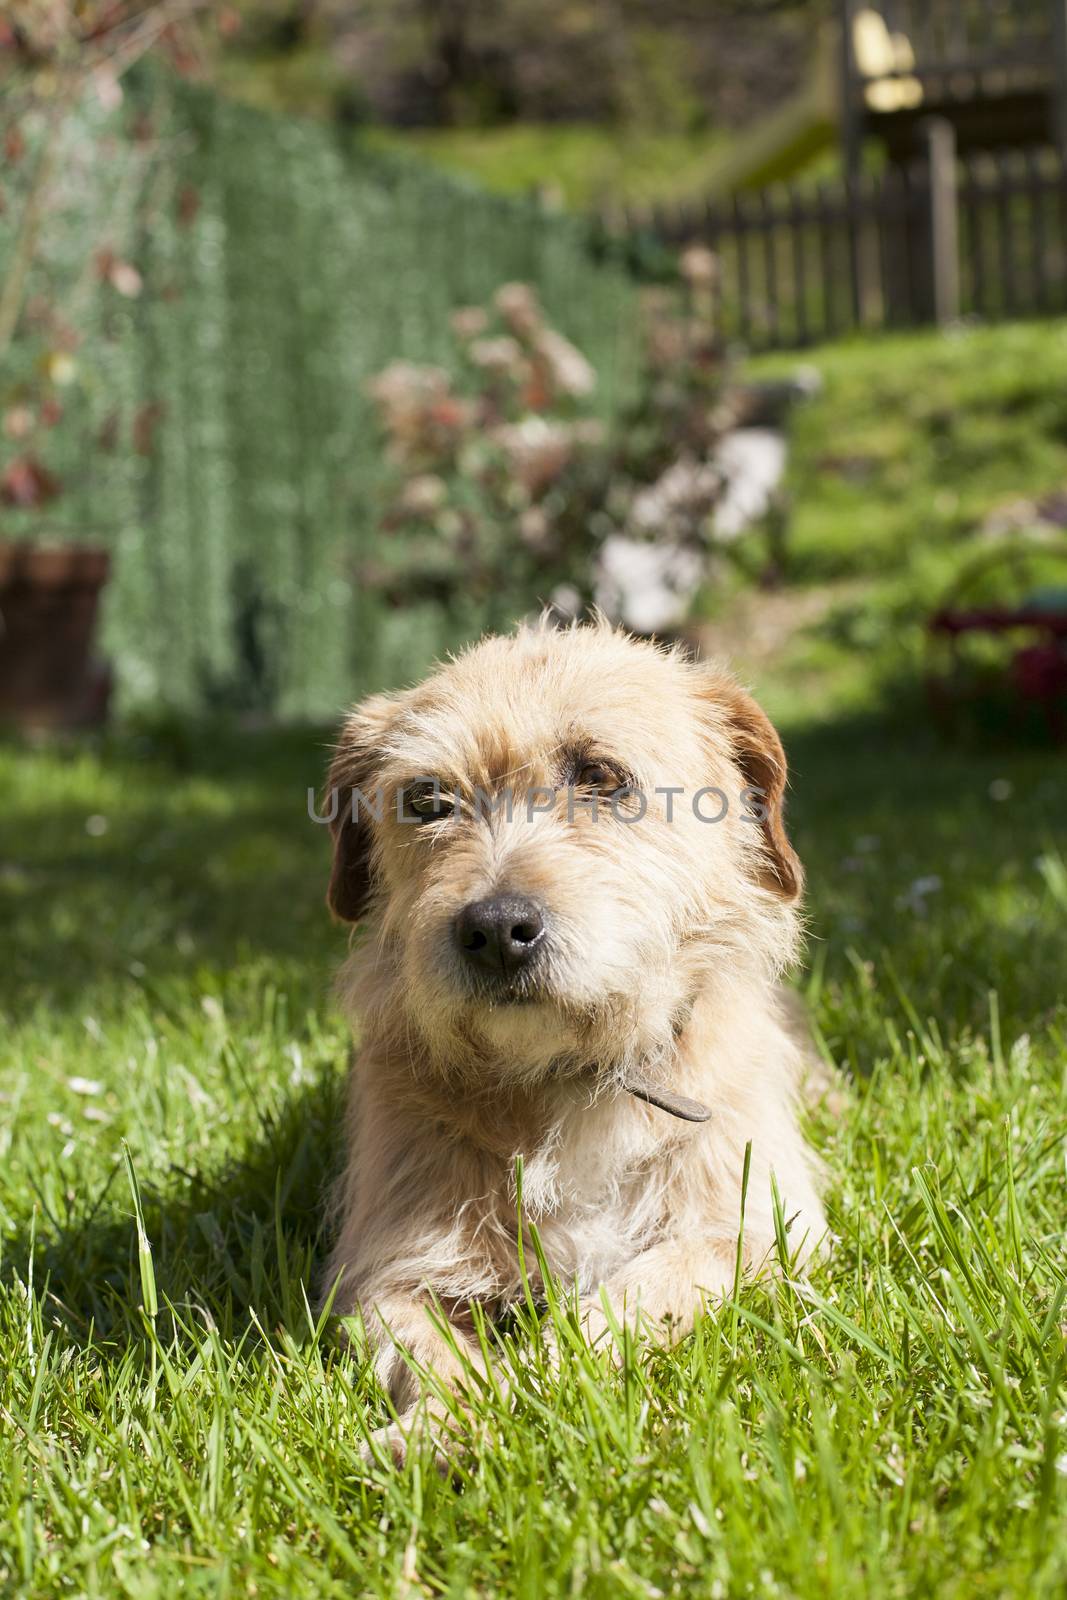 brown terrier breed dog lying on green grass lawn